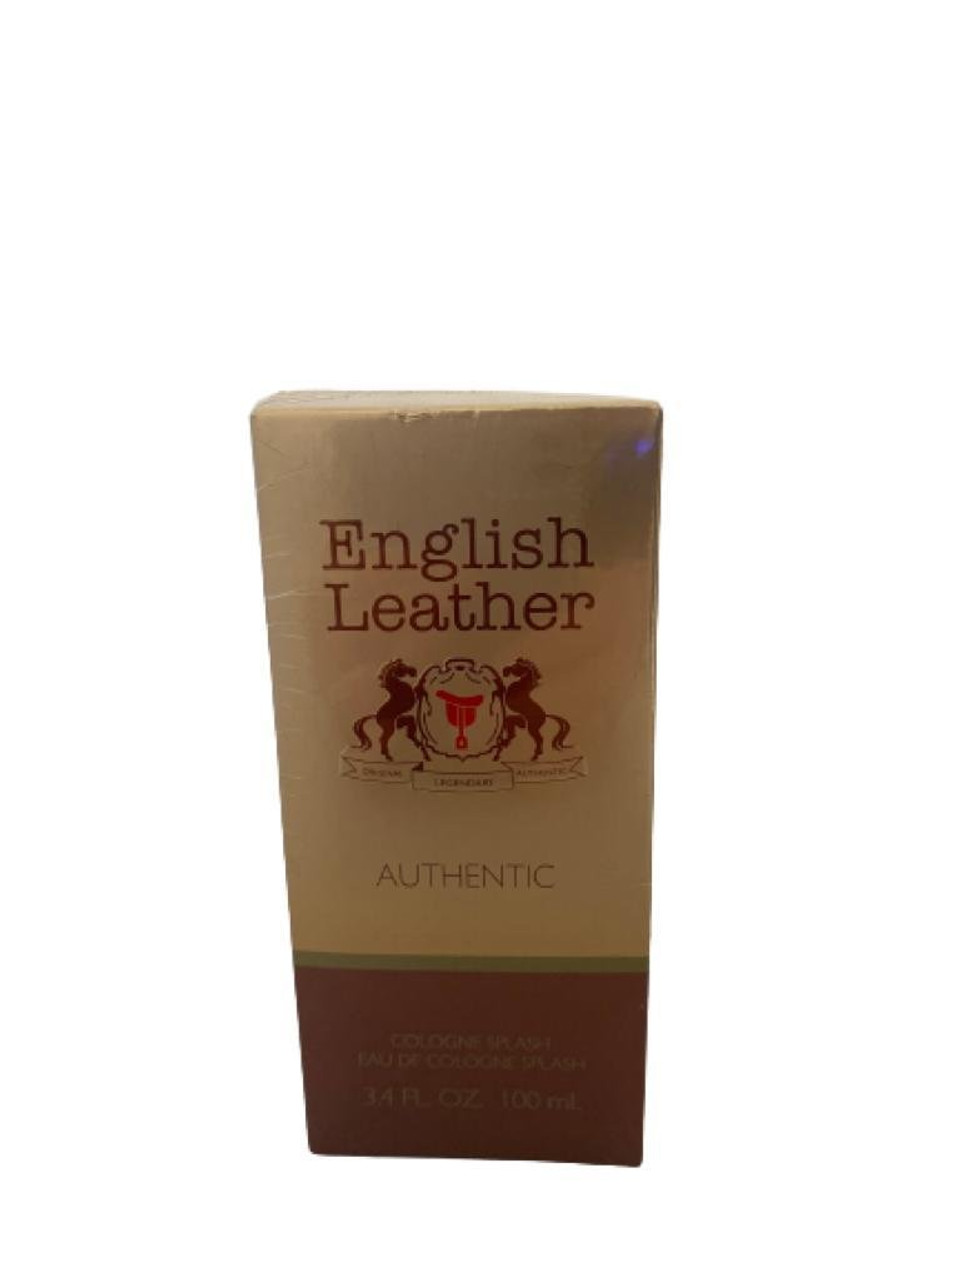 English Leather Authentic Cologne Splash for Men, 3.4 FL - Name Brand  Overstock